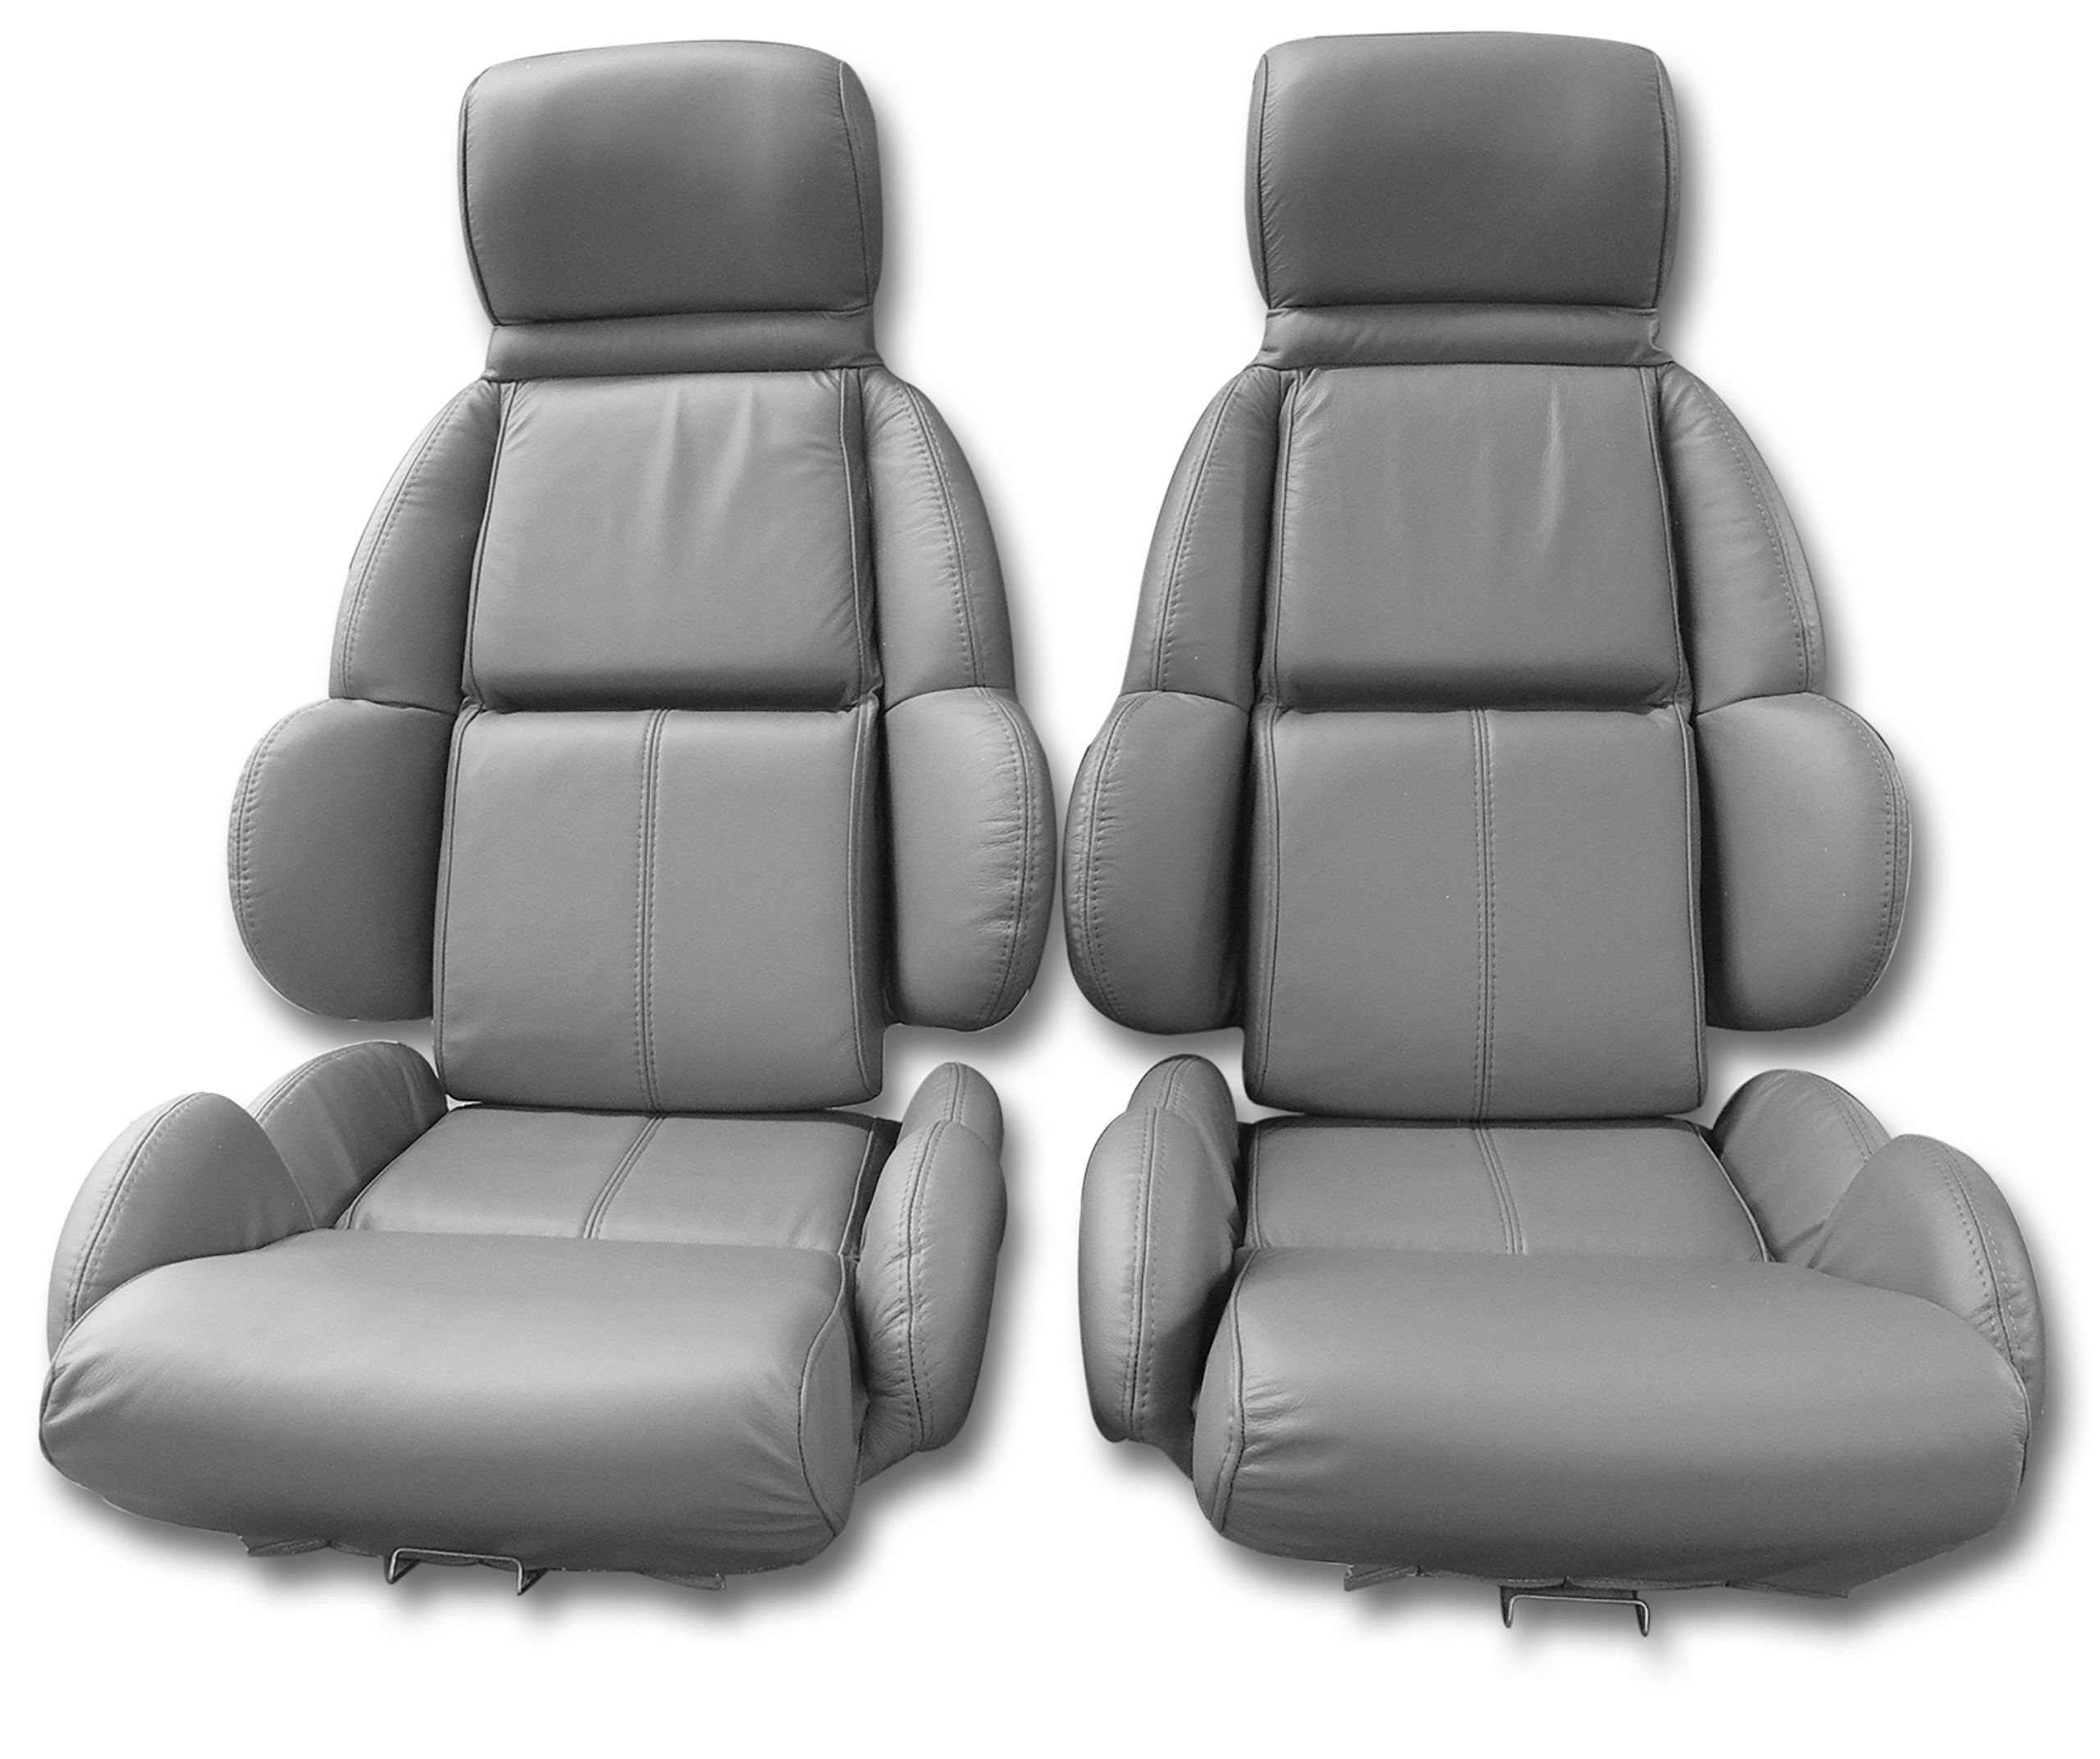 1989 C4 Corvette Mounted Leather Seat Covers Gray Standard